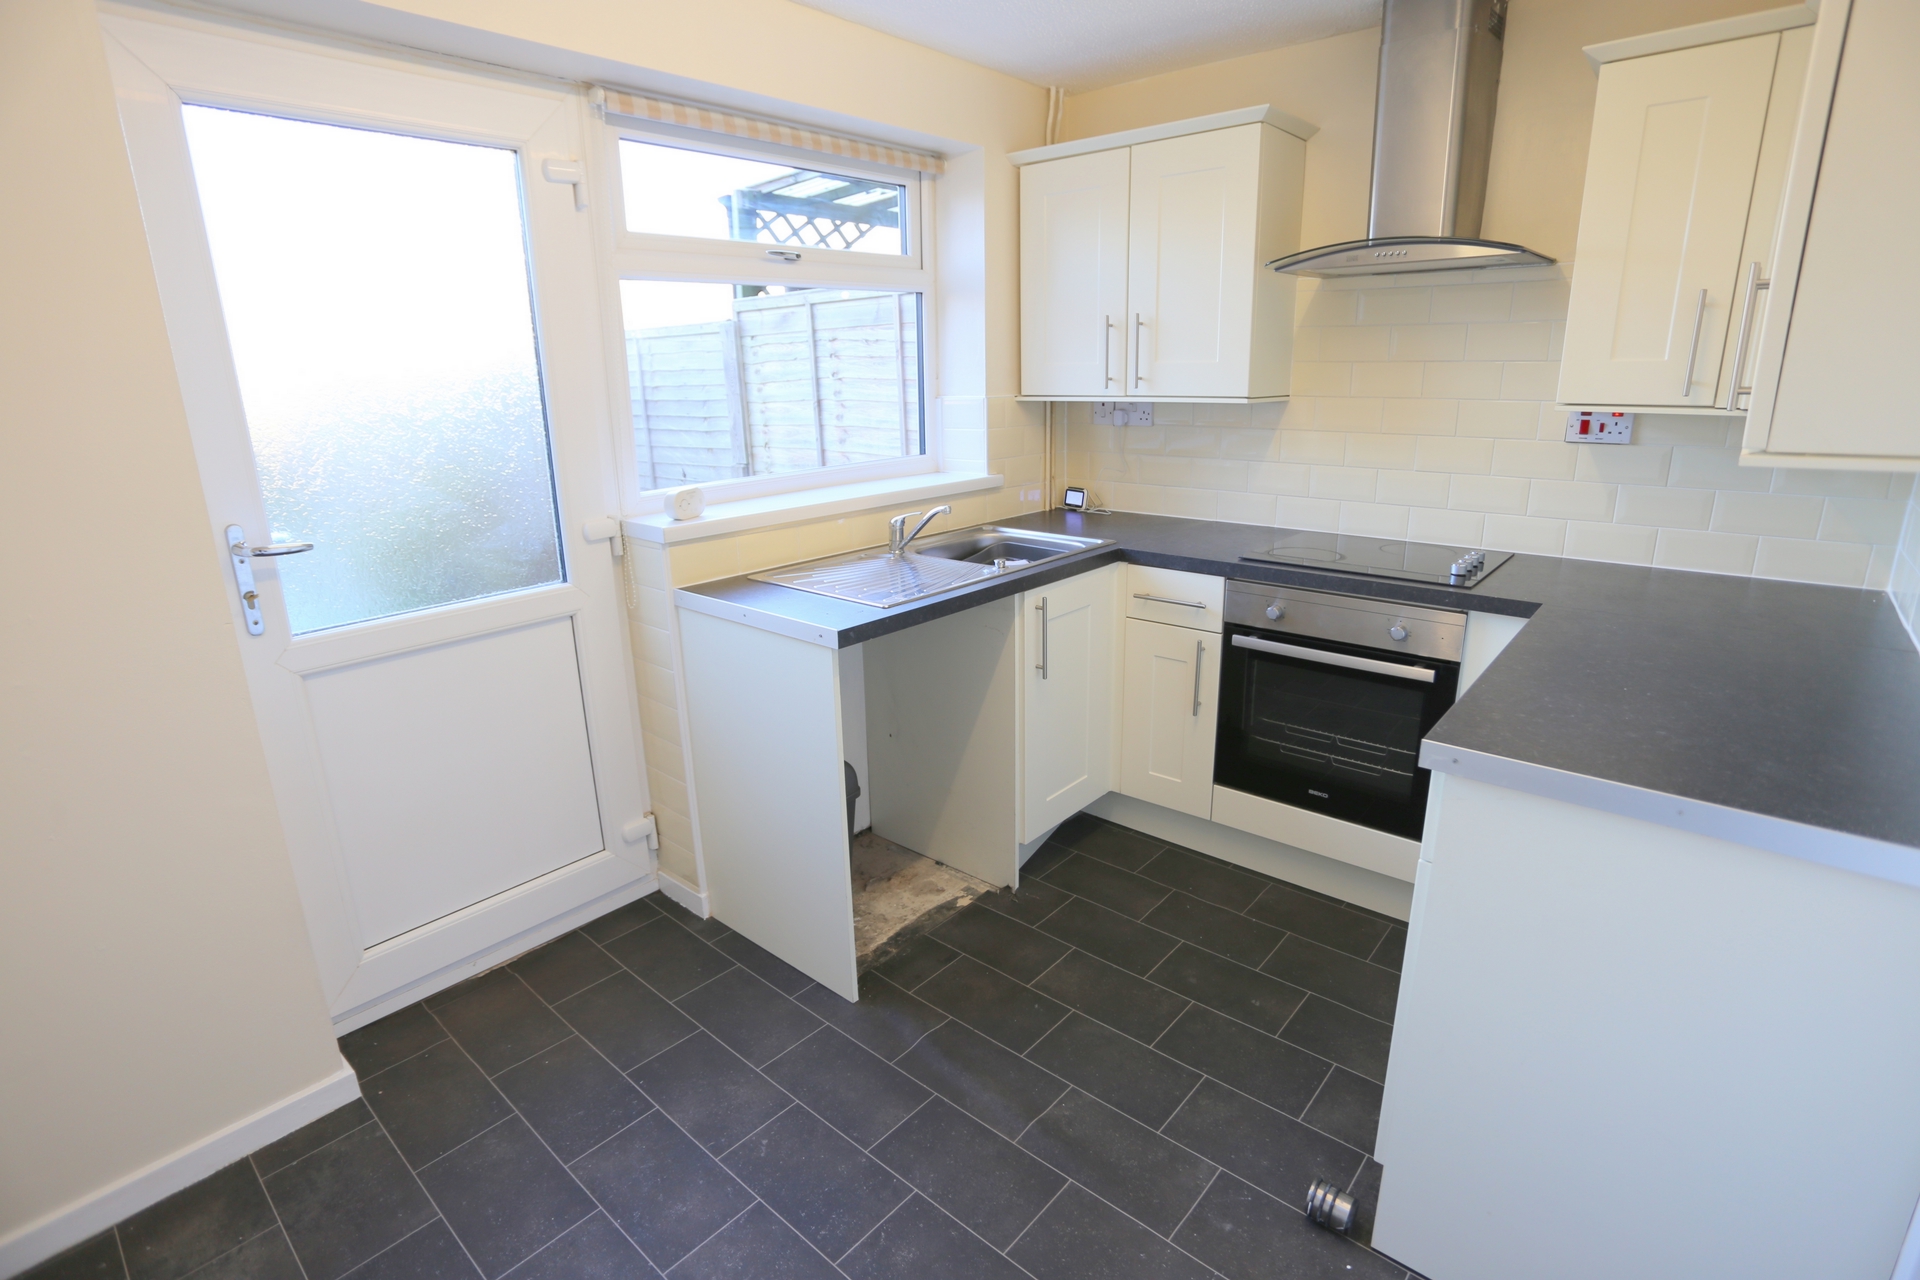 2 bedrooms semi detached, 5 Waterbeck Grove Trentham Stoke-On-Trent Staffs